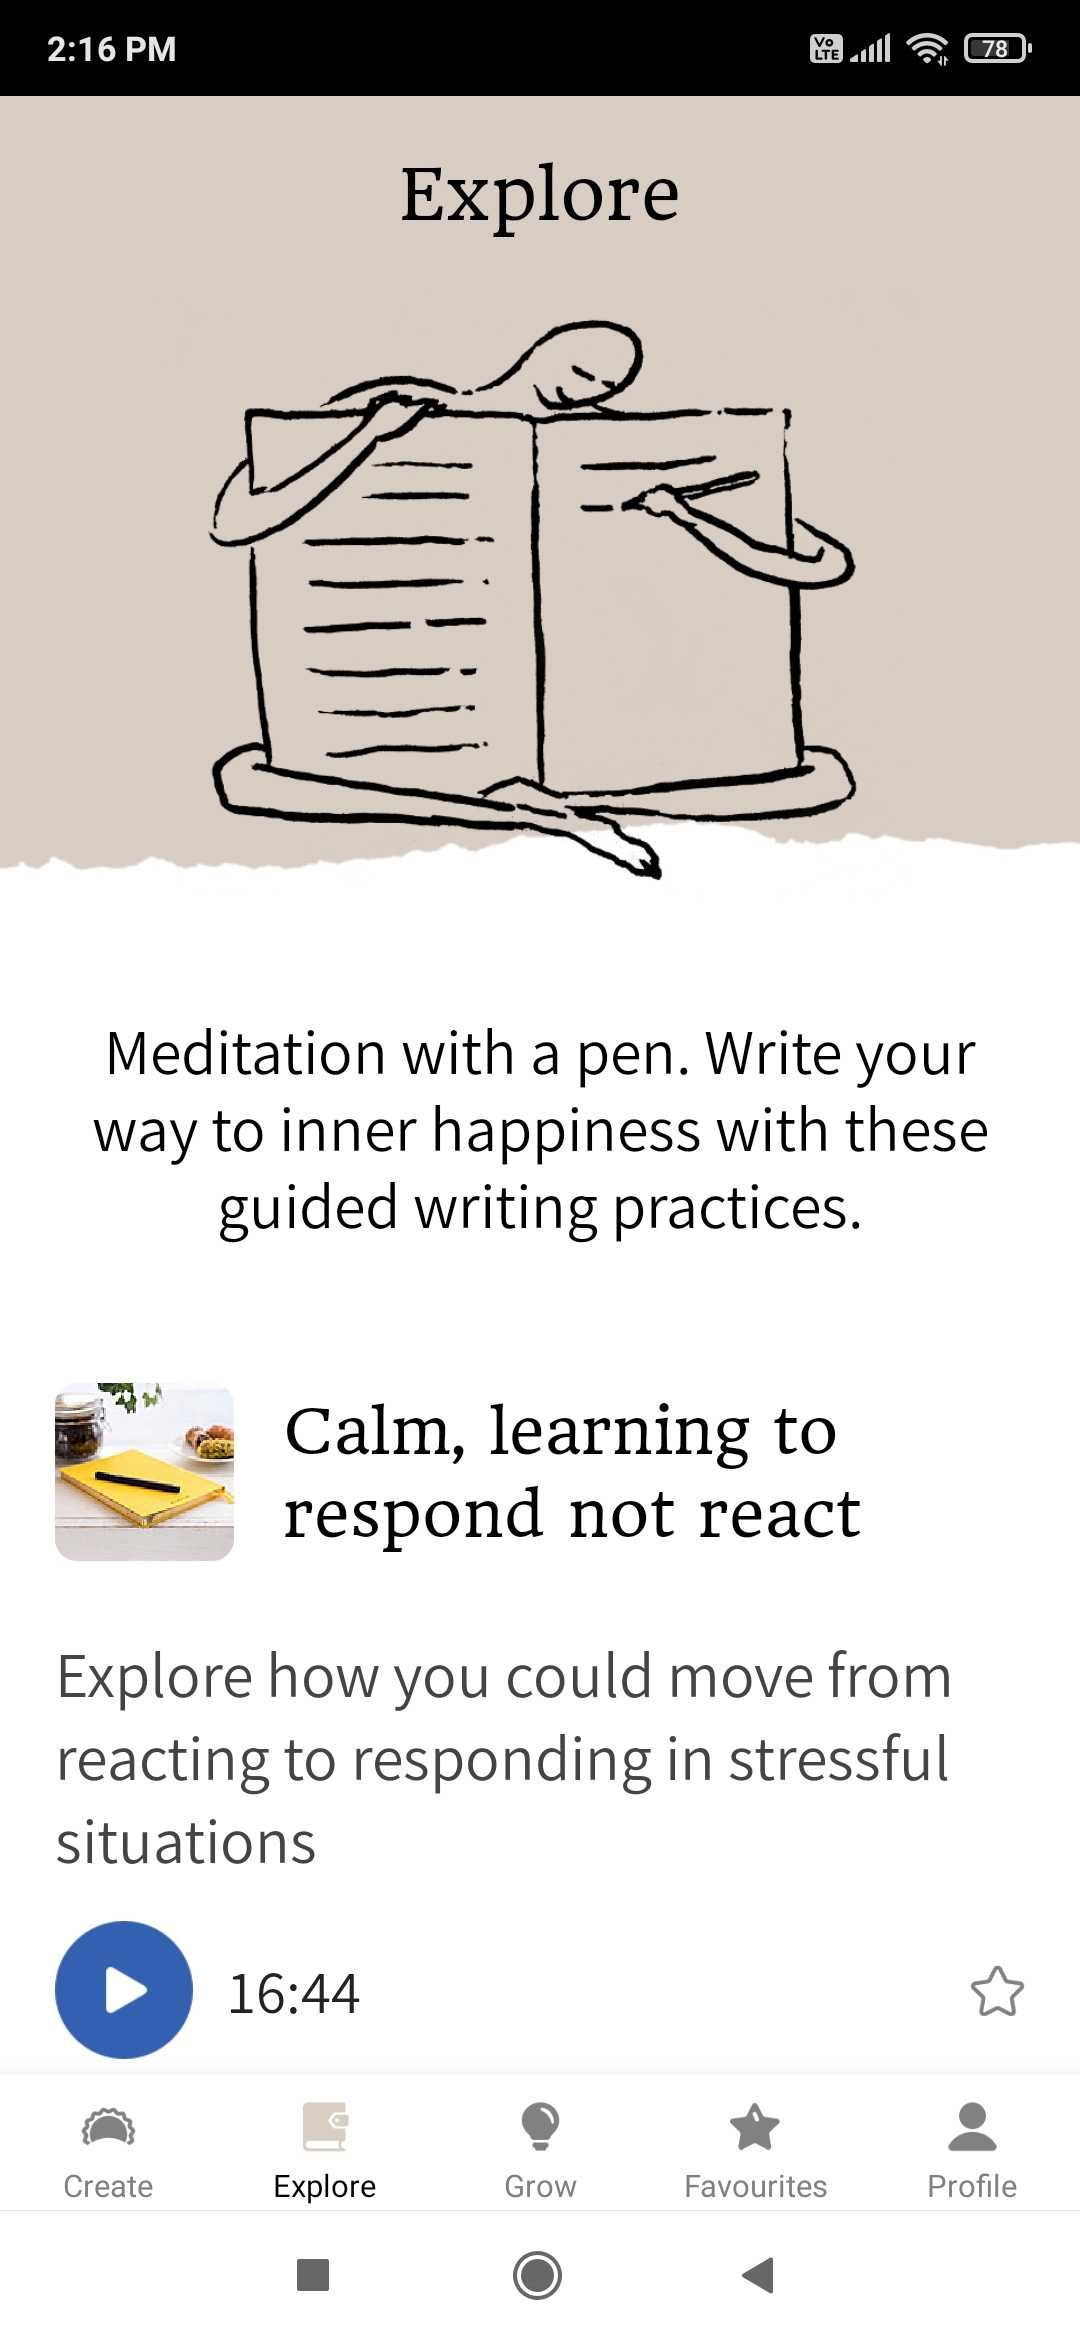 Unlike many other meditation apps, Happy Habit offers a written guided meditation